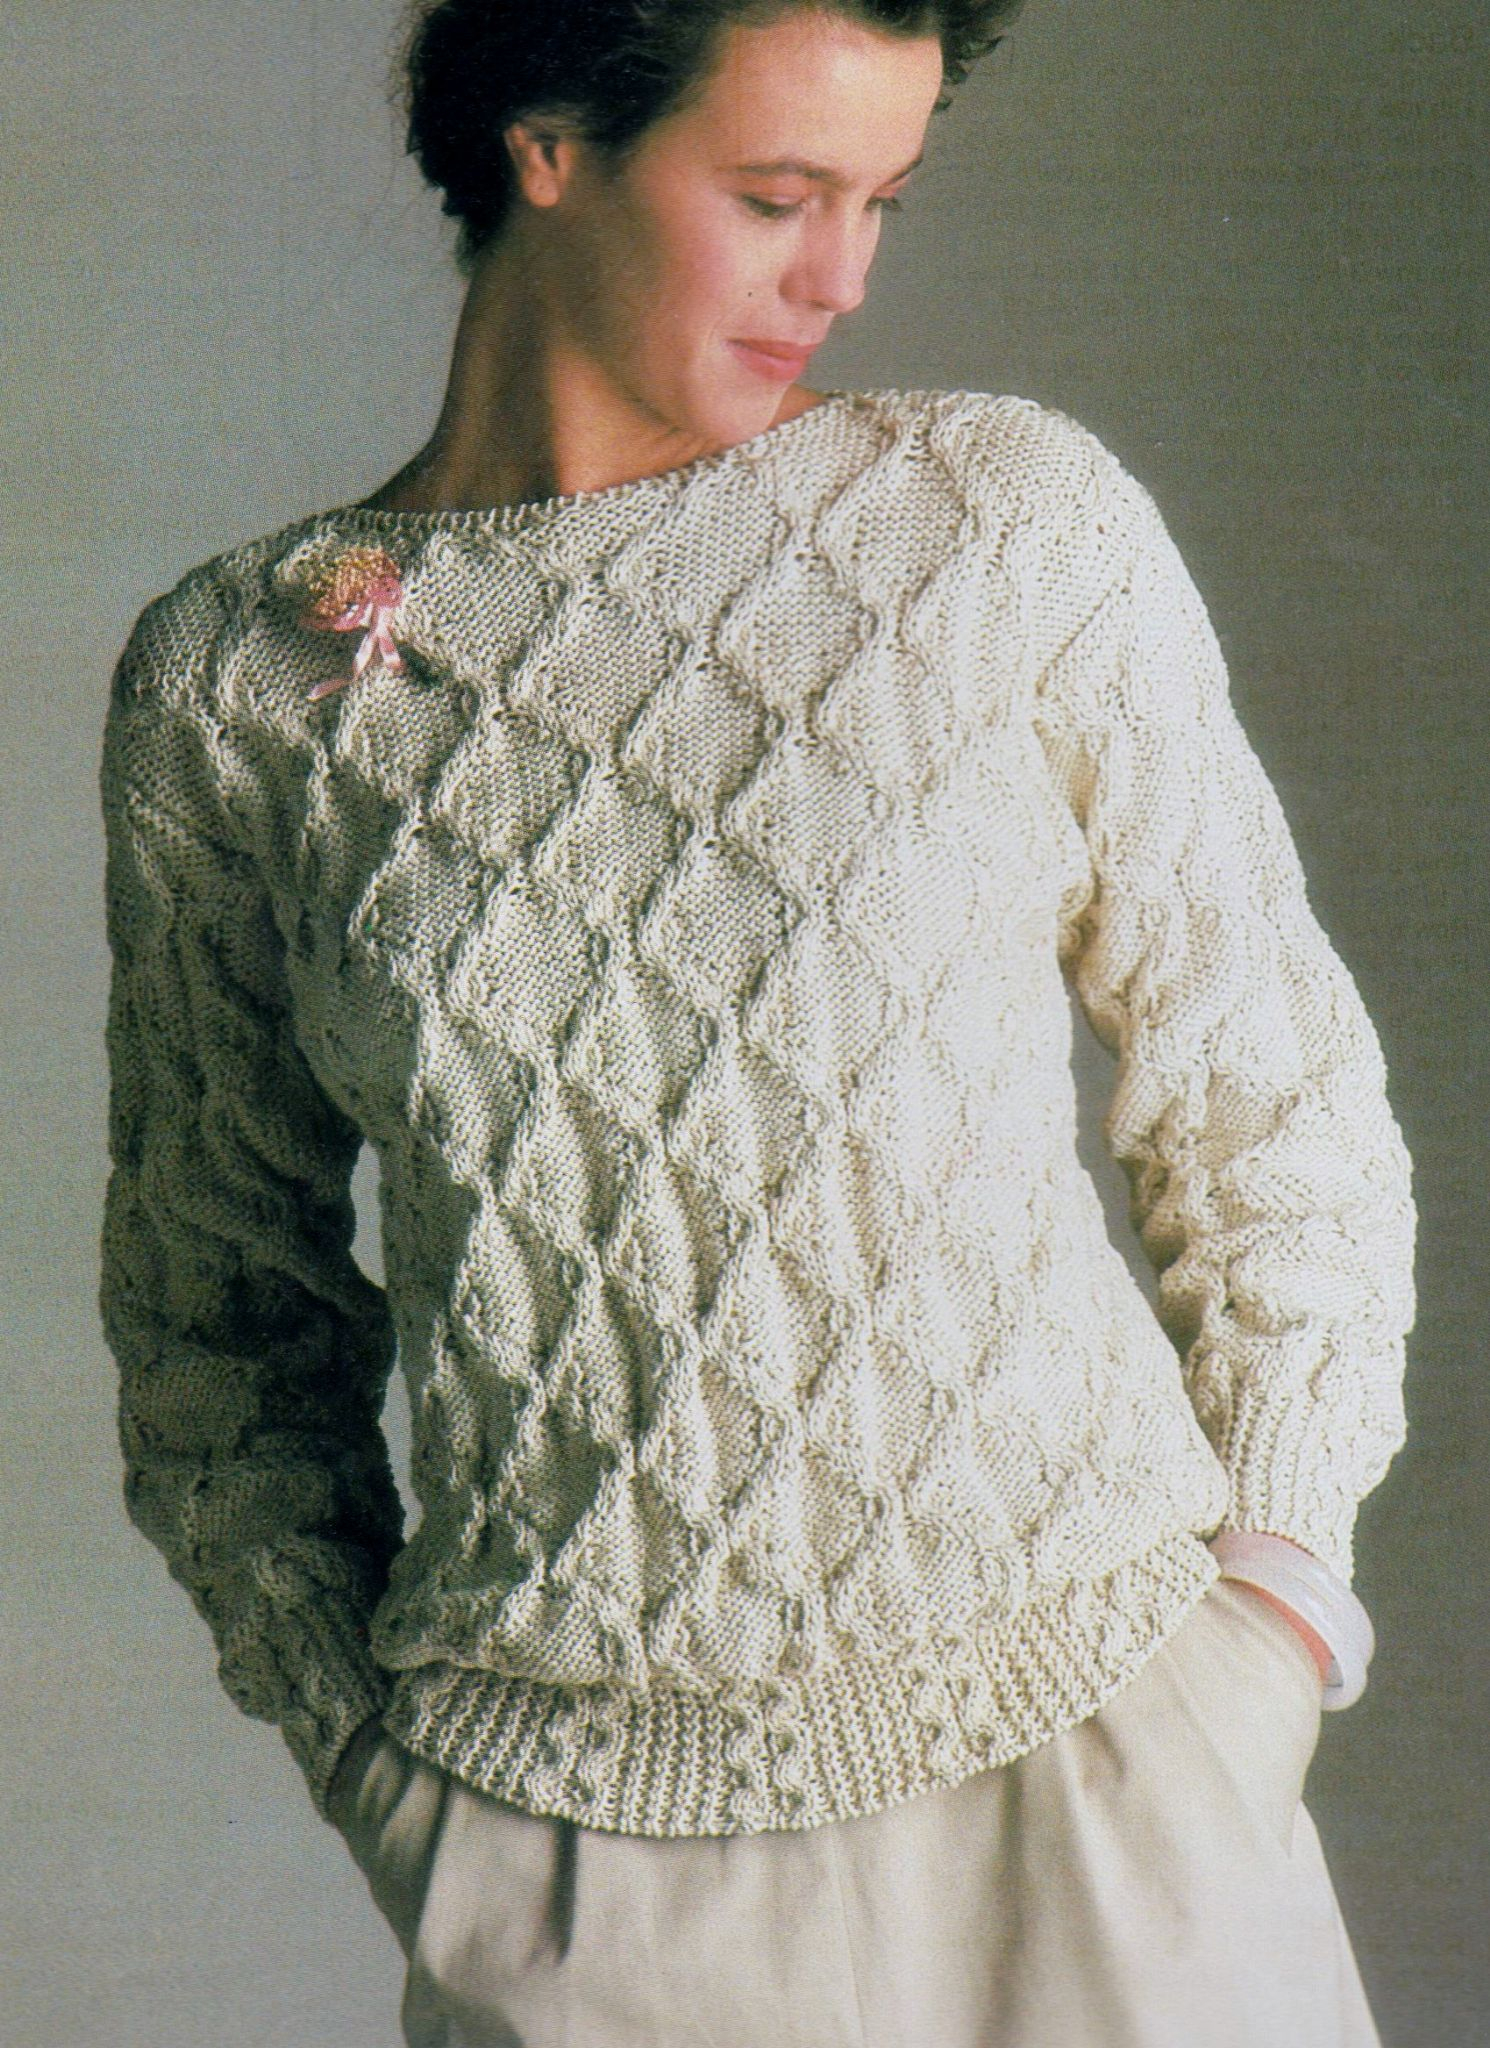 Knitting Patterns Download Pdf Digital Download Vintage Knitting Pattern To Make A Ladies Aran Trellis Patterned Sweater Jumper Pullover With Cable Ribs